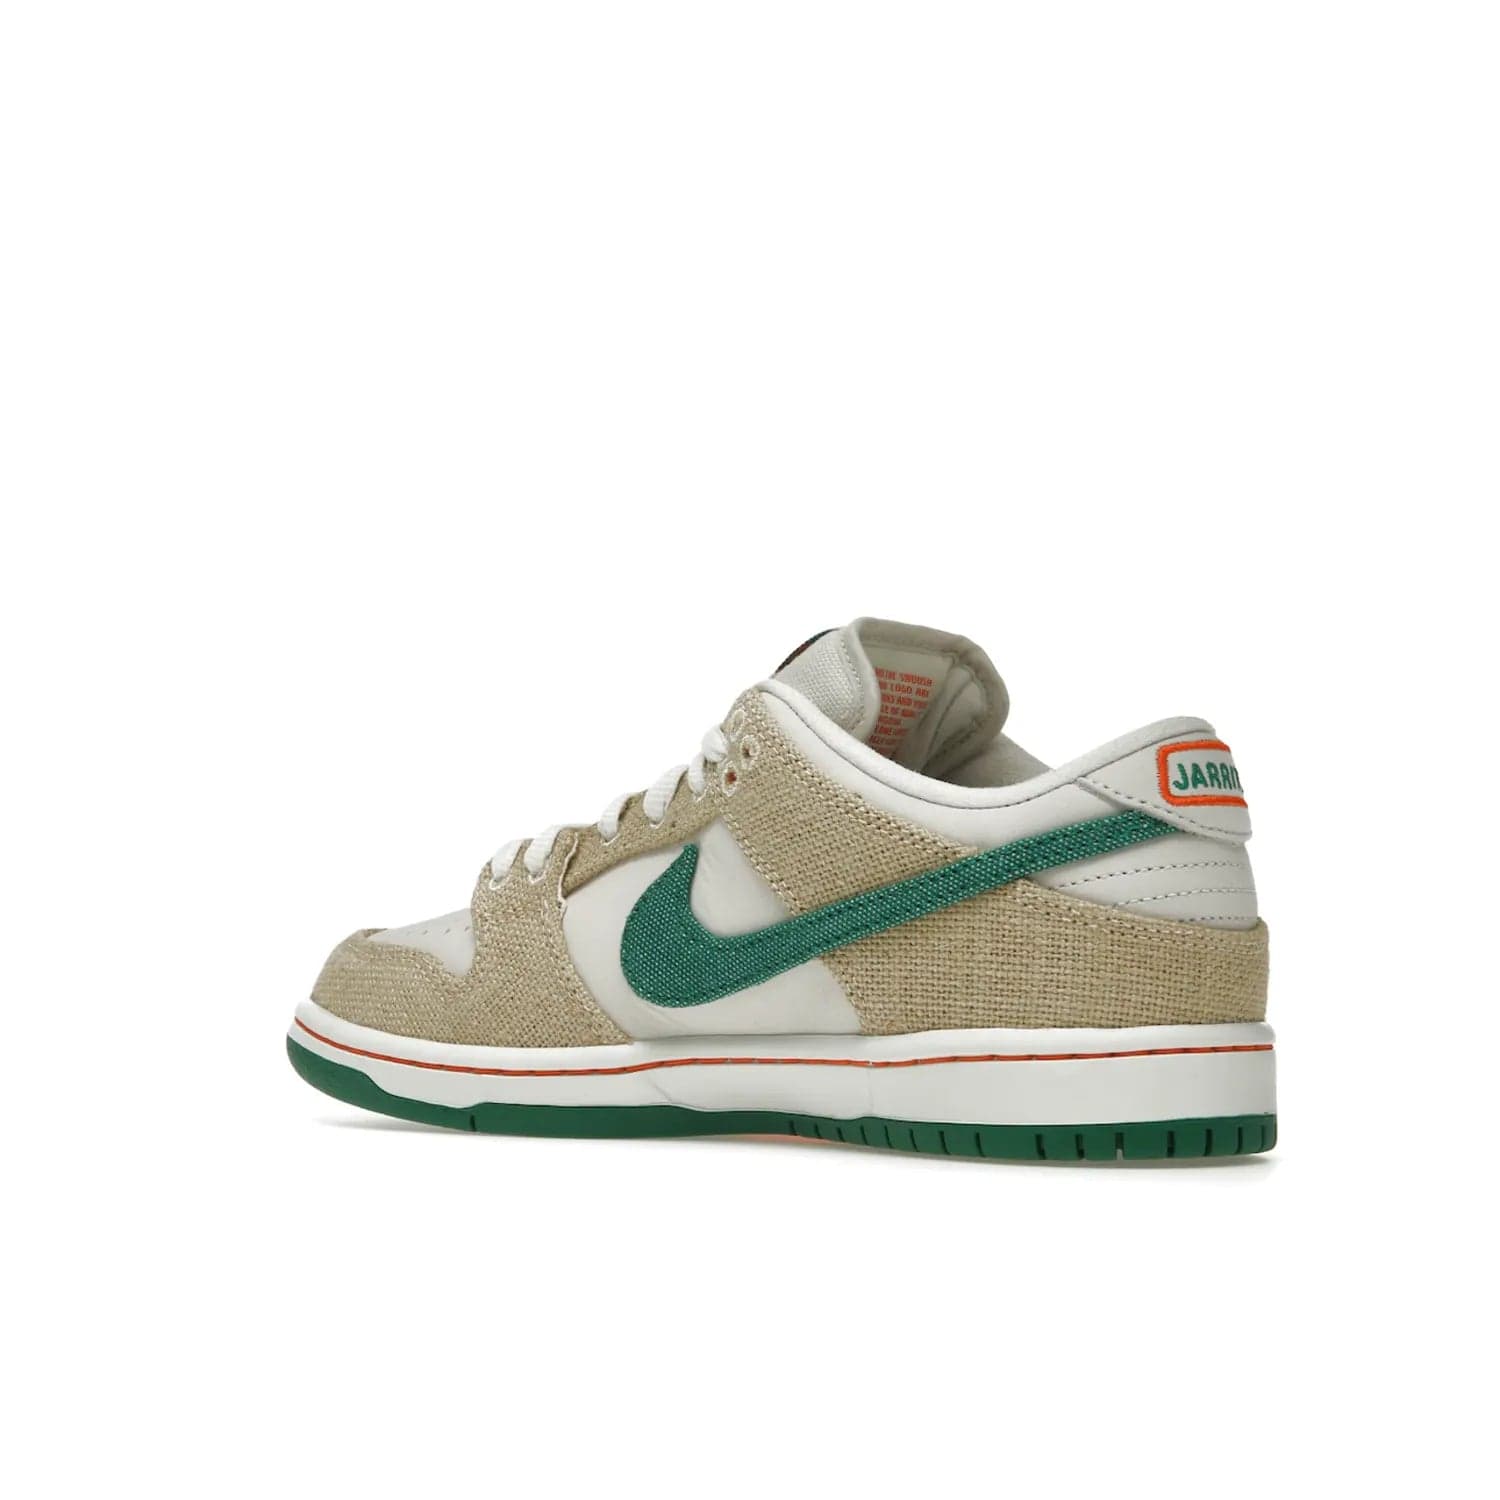 Nike SB Dunk Low Jarritos - Image 23 - Only at www.BallersClubKickz.com - Shop limited edition Nike SB Dunk Low Jarritos! Crafted with white leather and tear-away canvas materials with green accents. Includes orange, green, and white laces to customize your look. Available now.